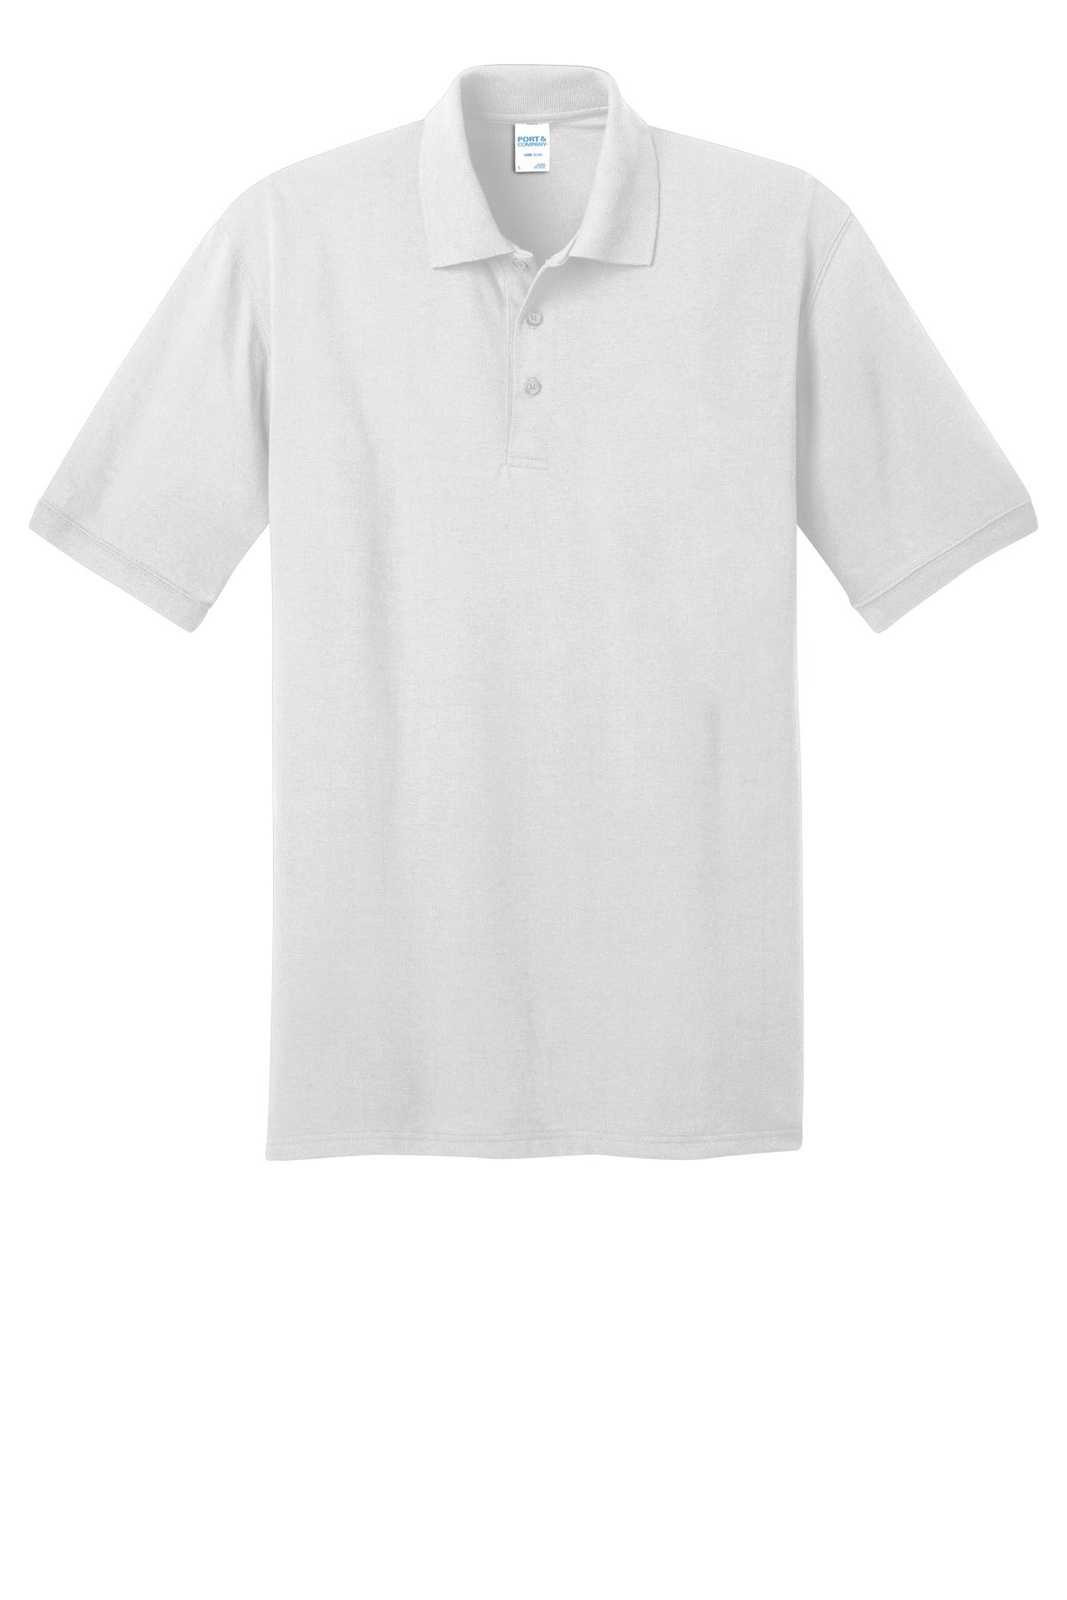 Port &amp; Company KP55T Tall Core Blend Jersey Knit Polo - White - HIT a Double - 3